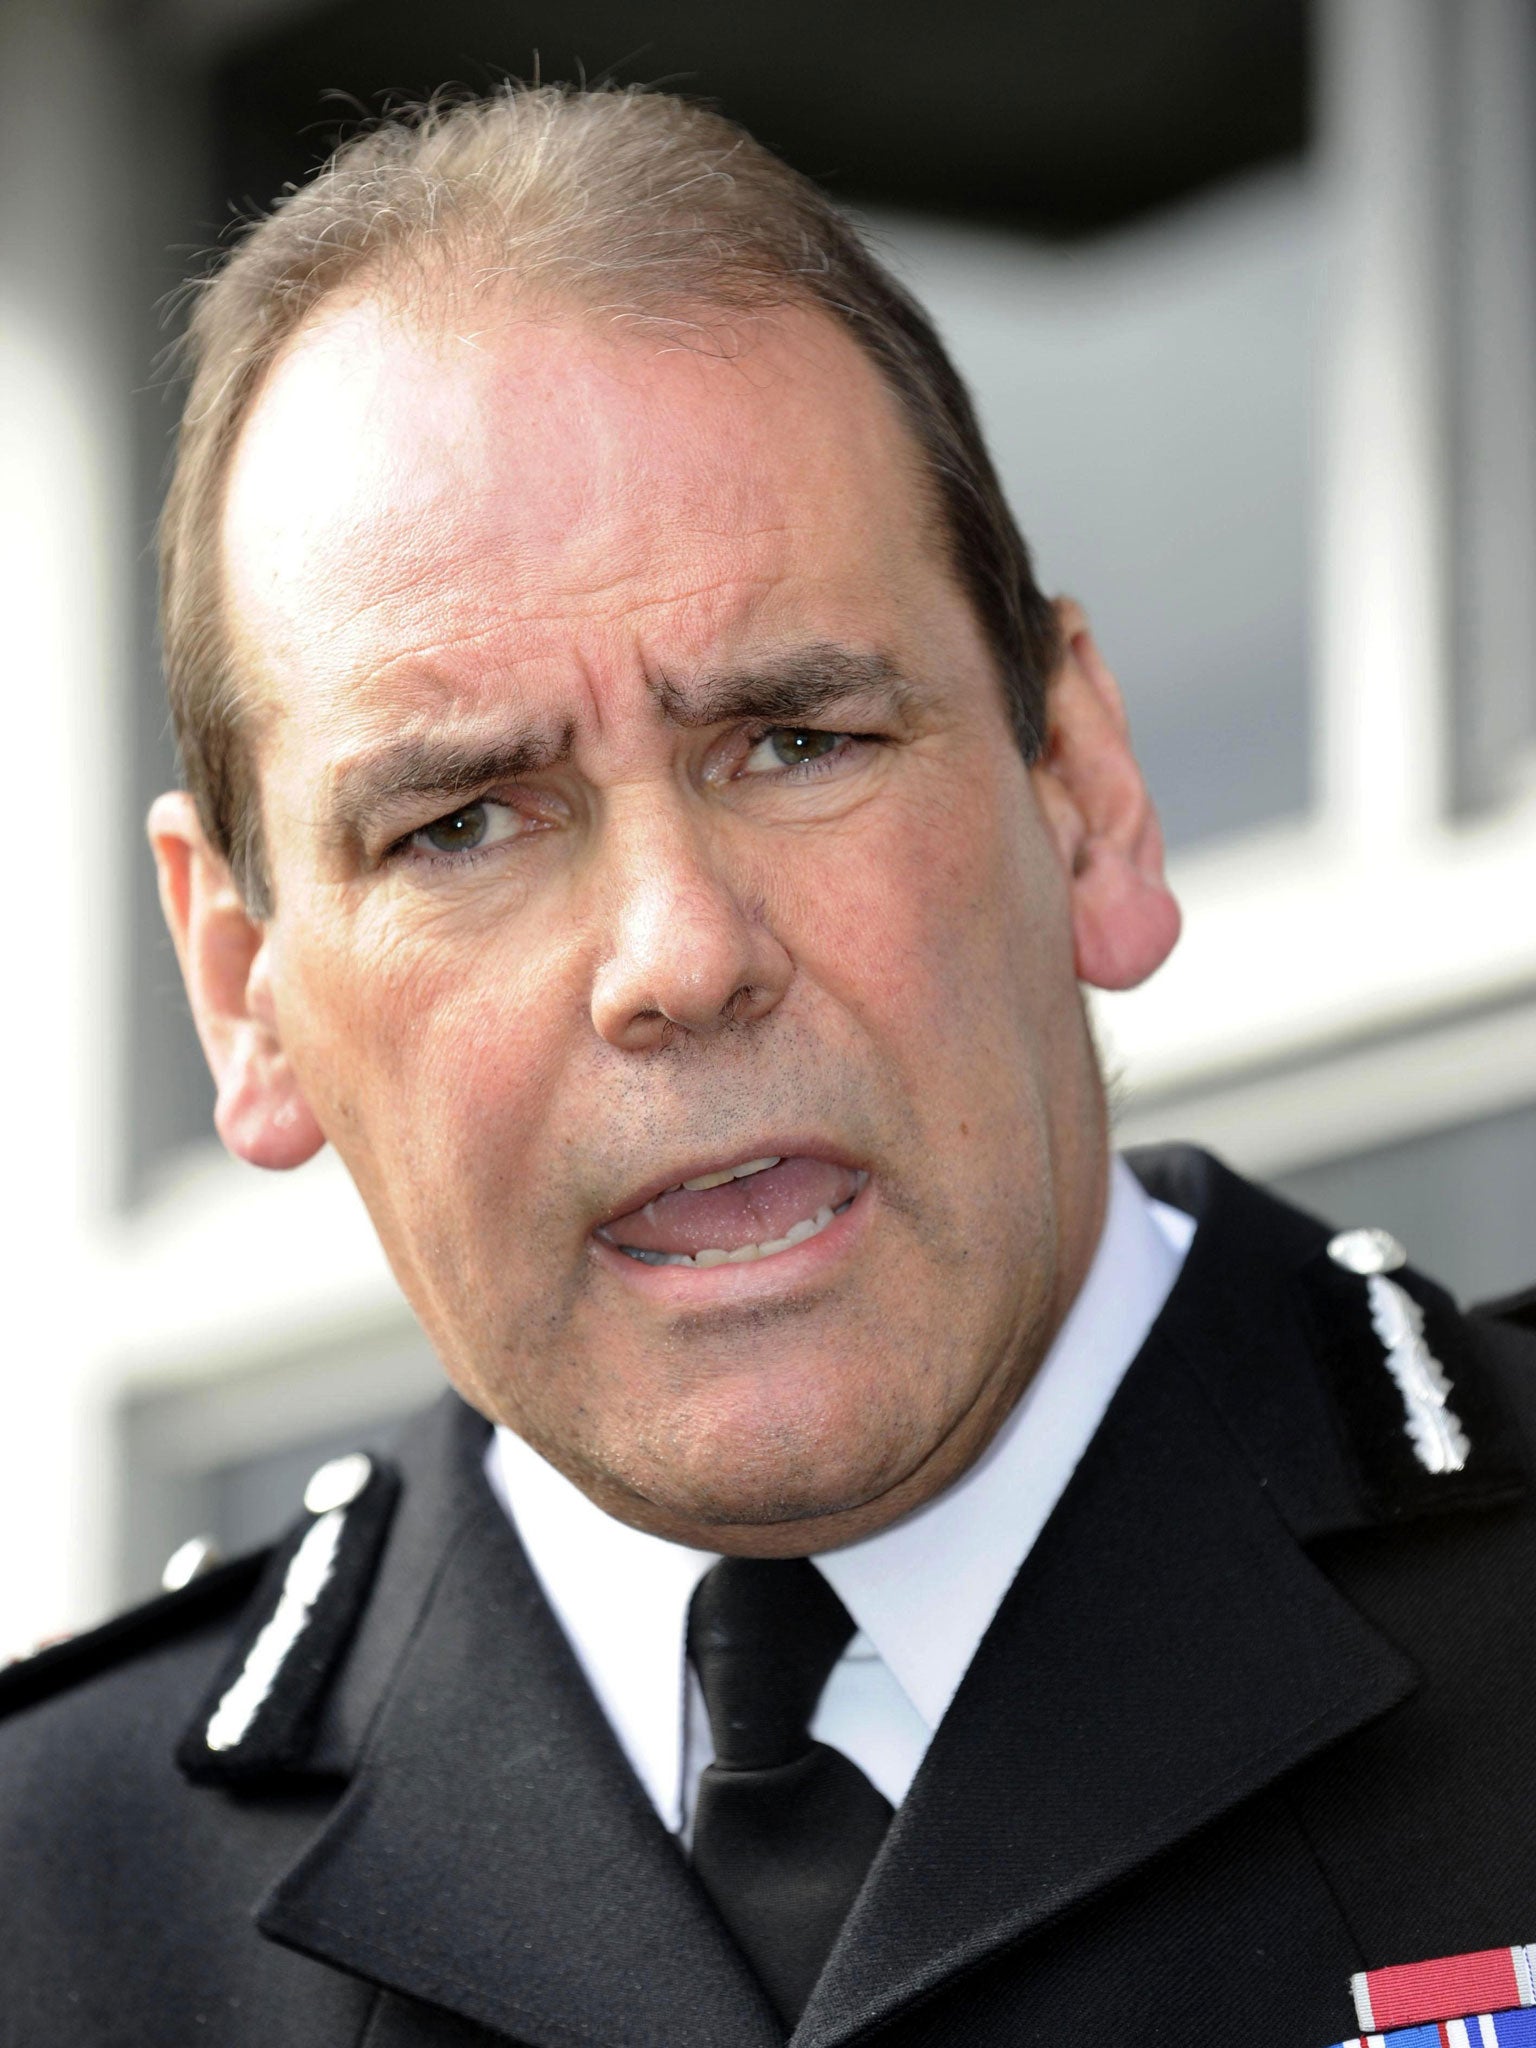 Sir Norman Bettison: The former Chief Constable is accused of discrediting Mohammed Amran